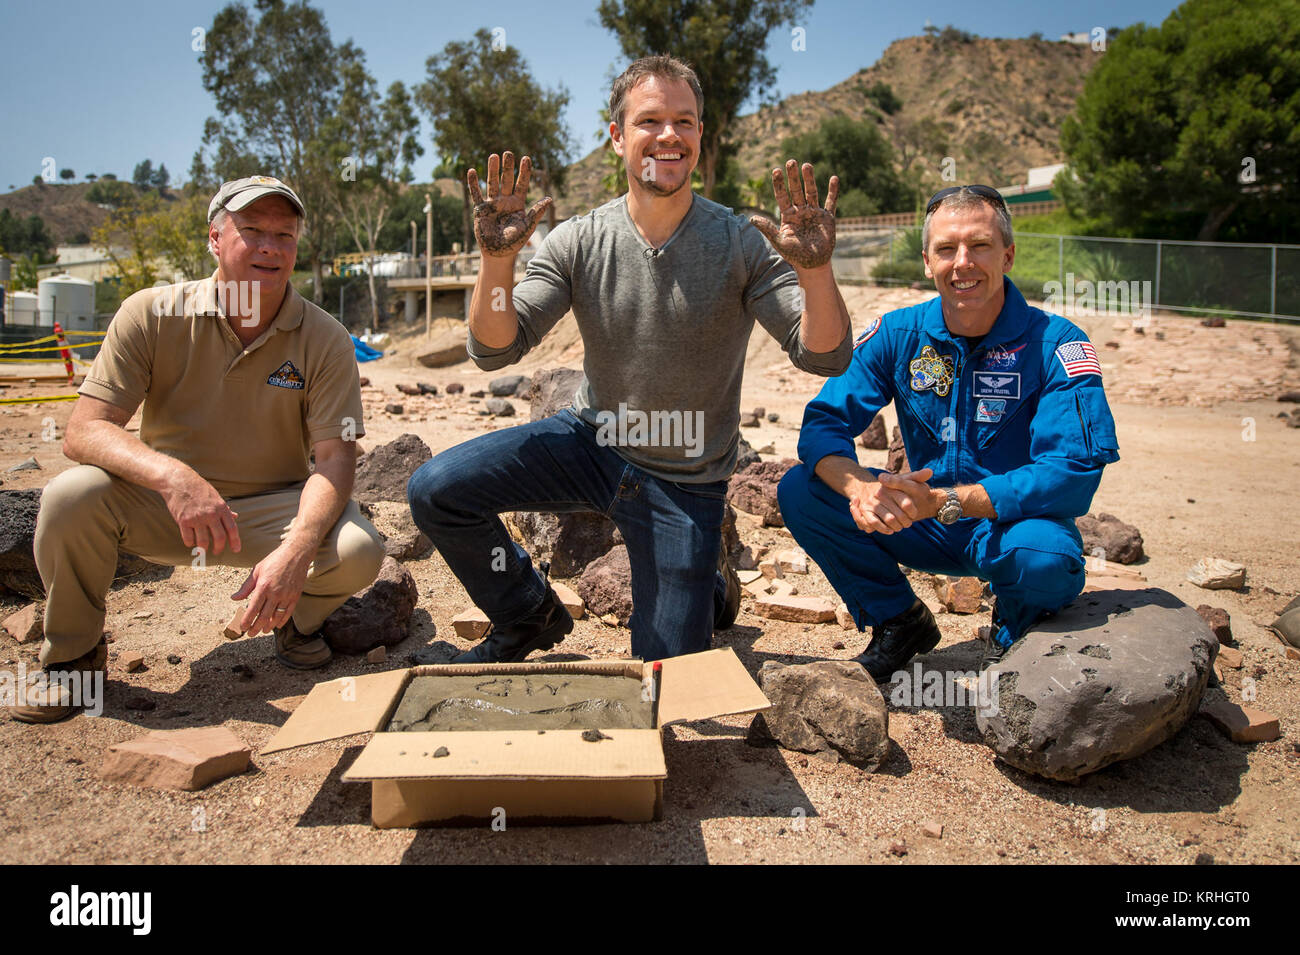 Actor Matt Damon, who stars as NASA Astronaut Mark Watney in the film “The Martian,” smiles after having made his hand prints in cement at the Jet Propulsion Laboratory (JPL) Mars Yard, while Mars Science Lab Project Manager Jim Erickson, left, and NASA Astronaut Drew Feustel look on, Tuesday, Aug. 18, 2015, at the JPL in Pasadena, California. While at JPL Damon meet with NASA scientists and engineers who served as technical consultants on the film. The movie portrays a realistic view of the climate and topography of Mars, based on NASA data, and some of the challenges NASA faces as we prepare Stock Photo